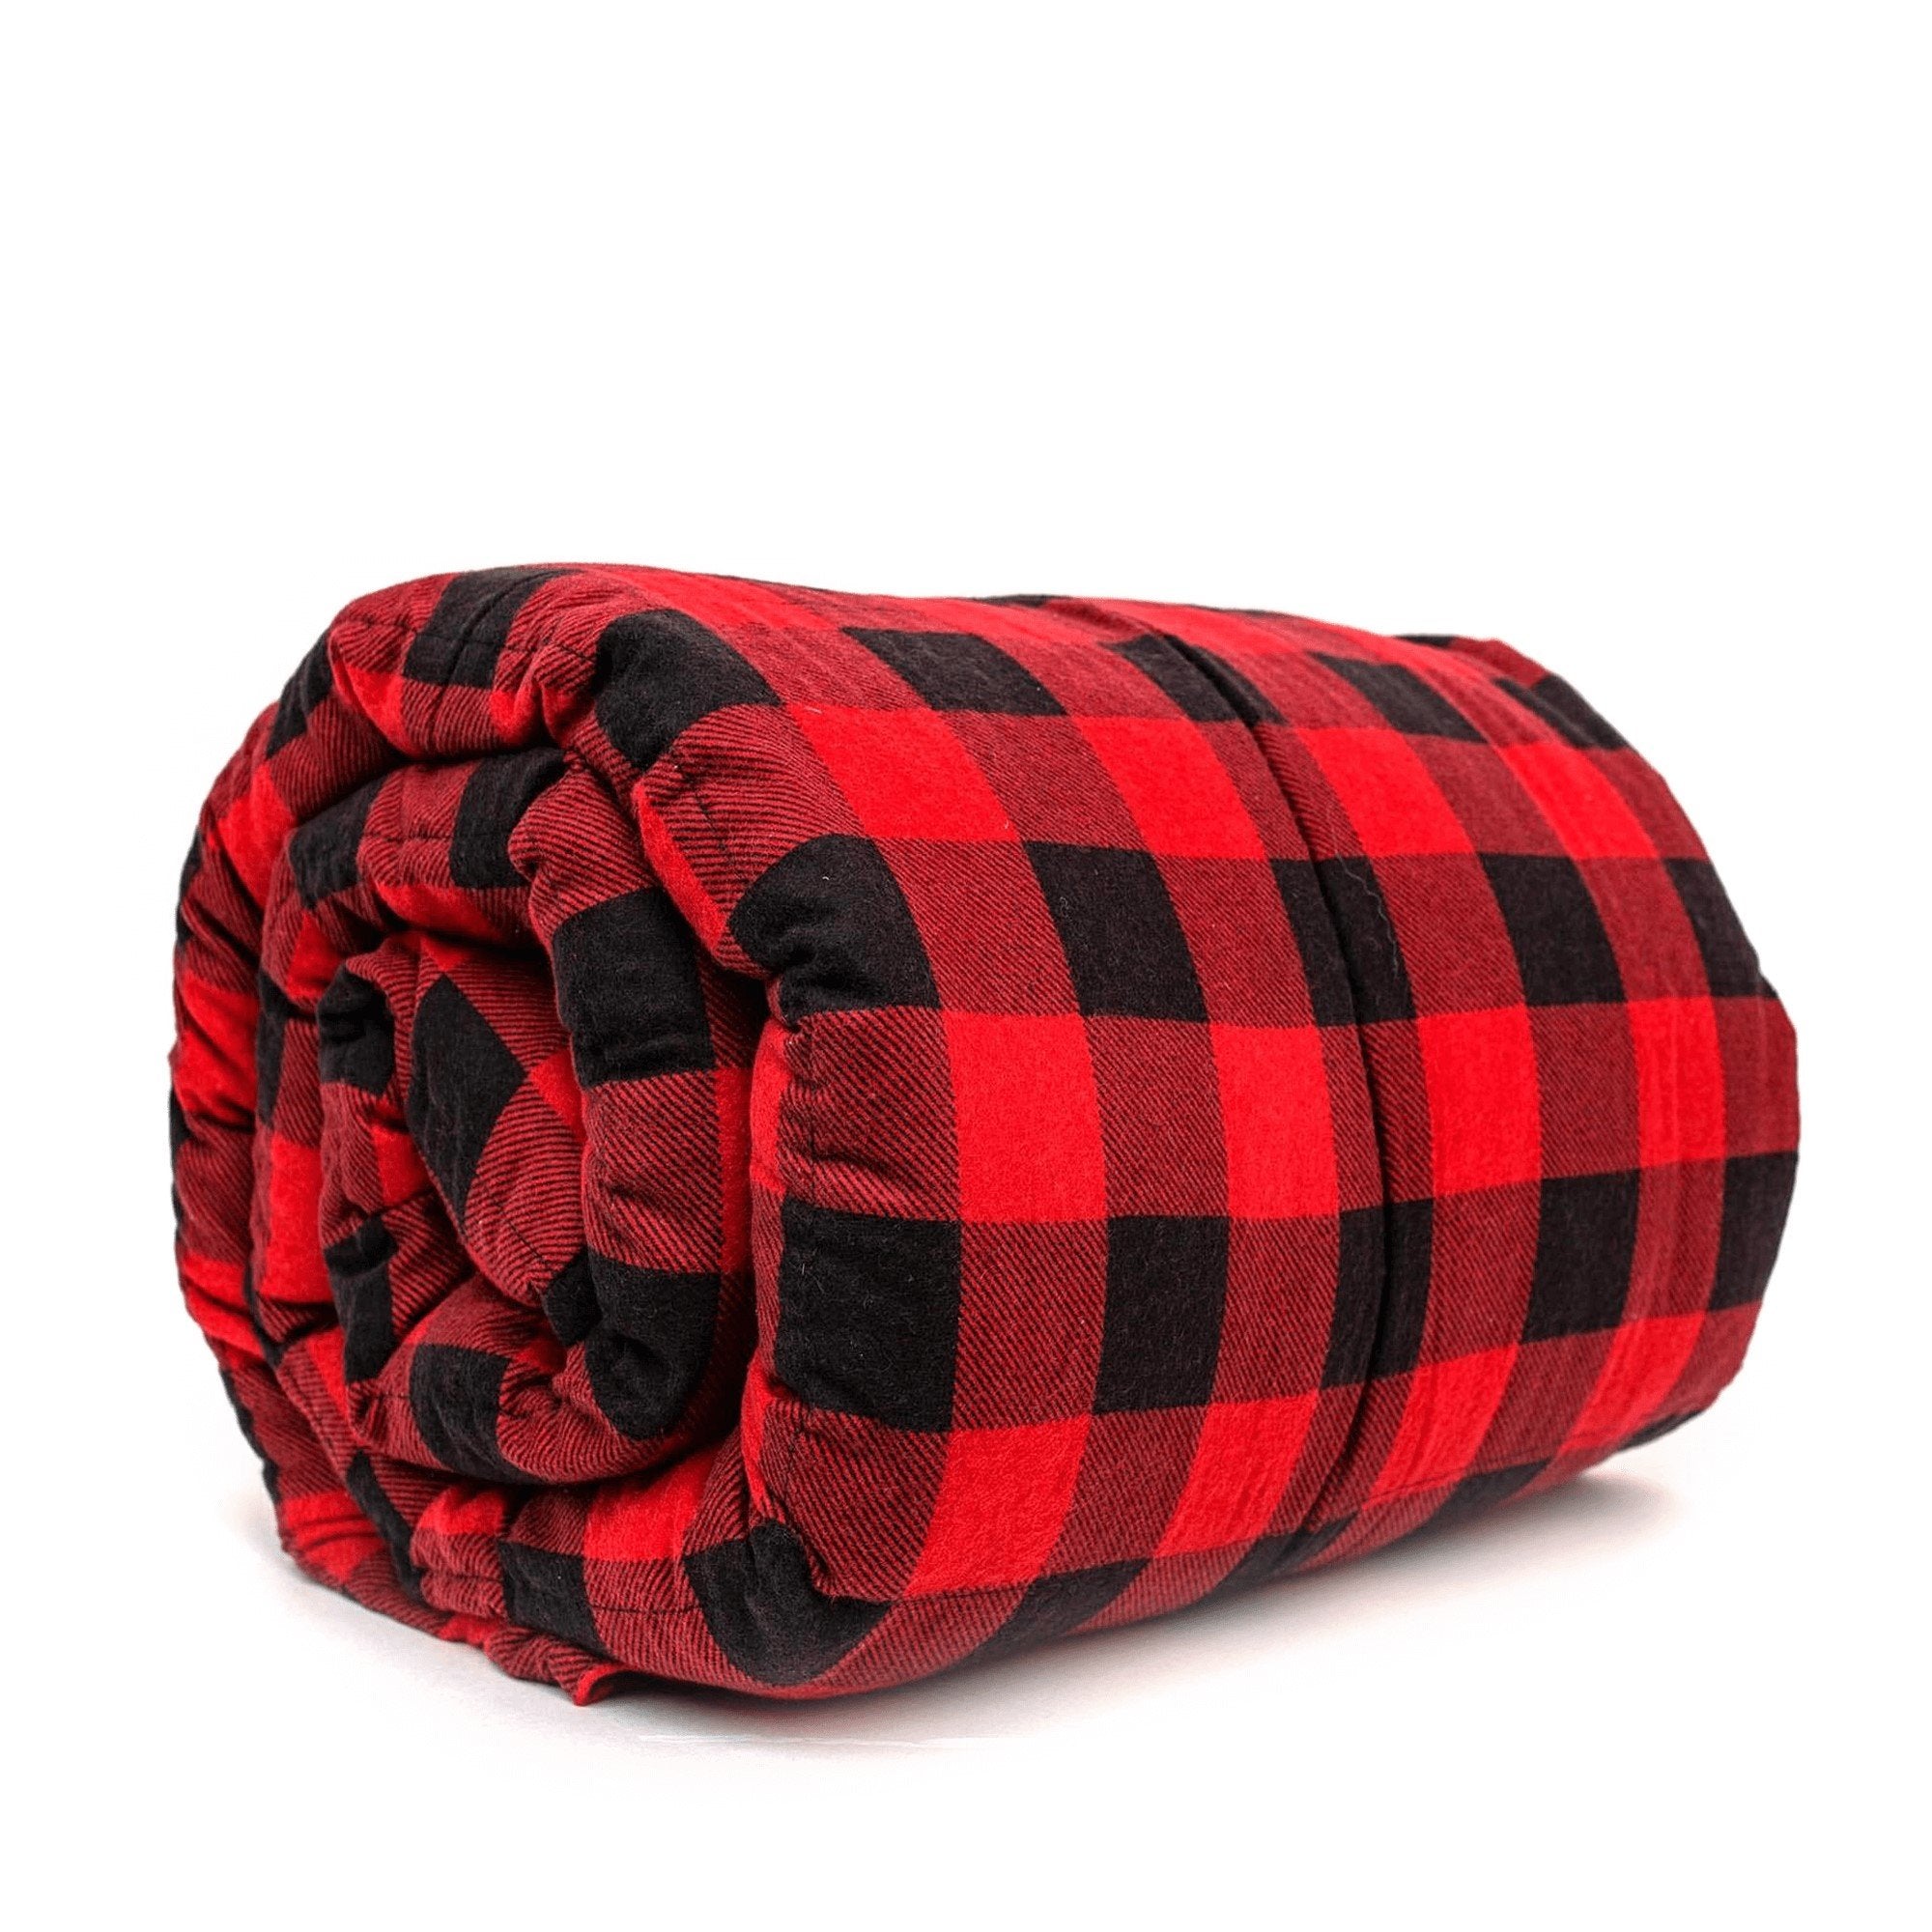 Man watches TV snuggled under a Mosaic Weighted Blankets Big Red Flannel Weighted Blanket